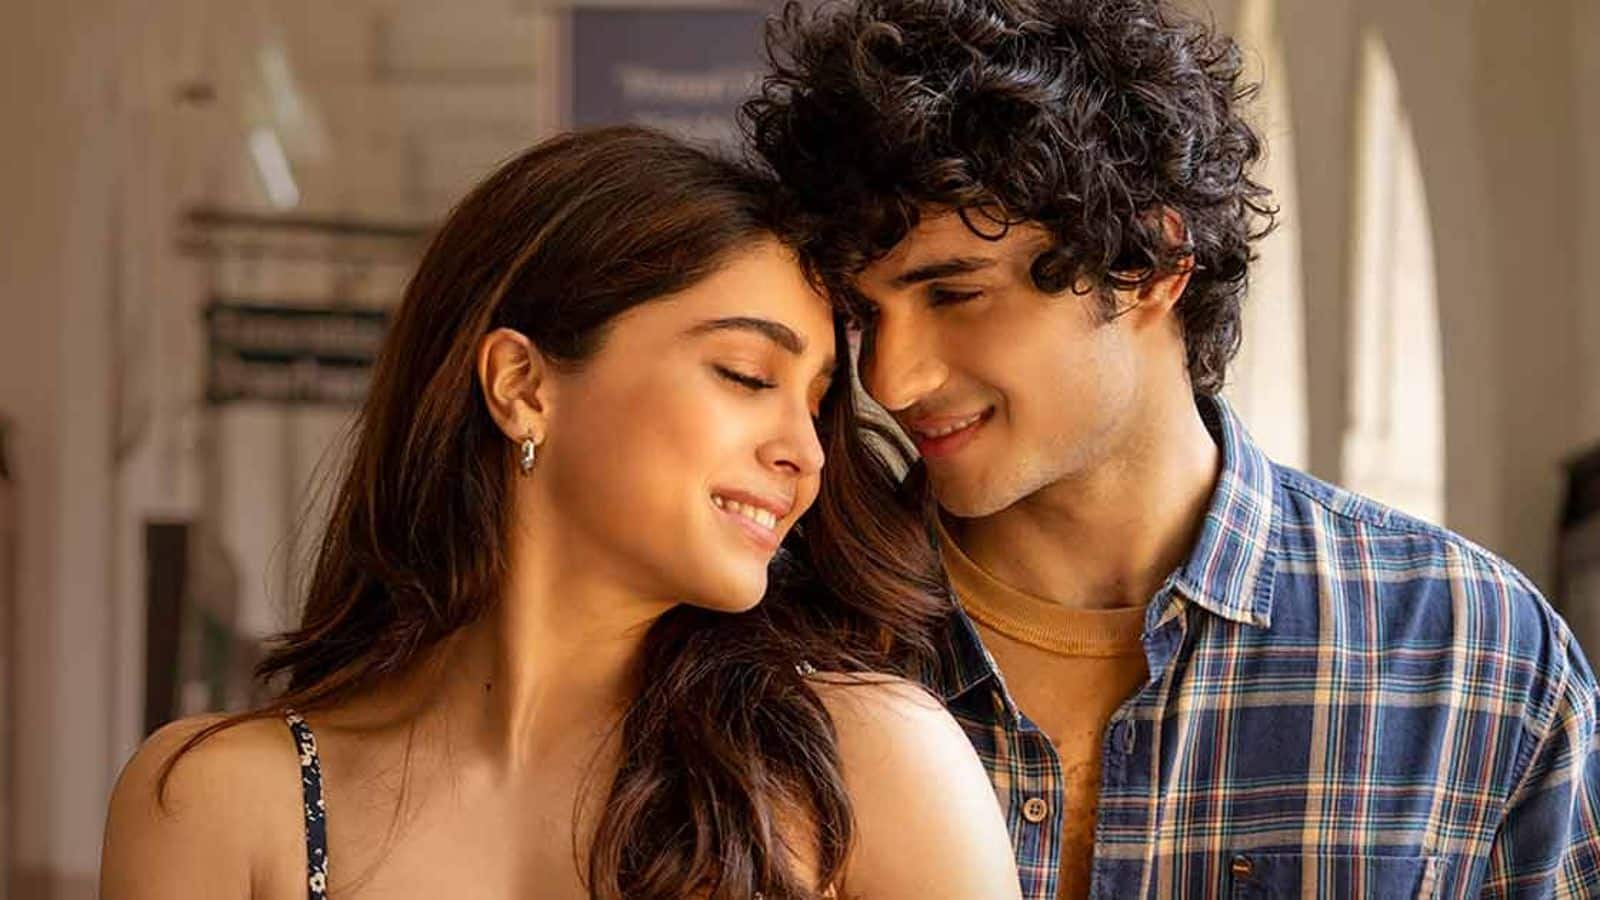 Box office: 'Munjya' continues strong performance, crosses ₹60cr mark smoothly